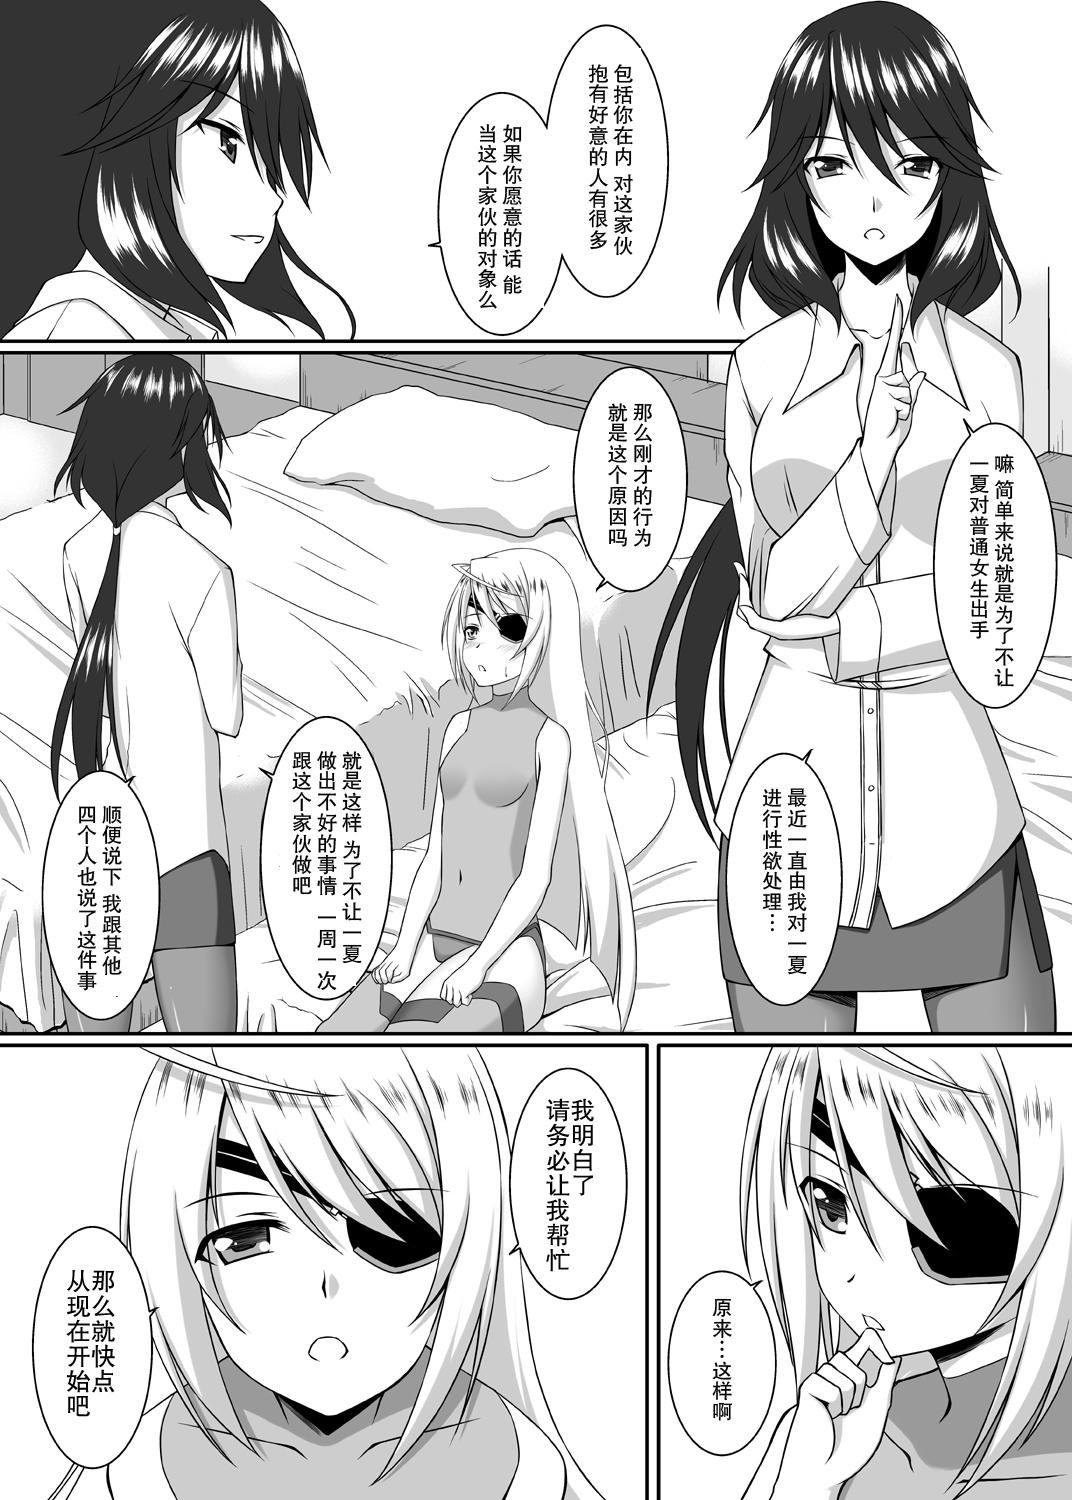 Cam Sex Snow Thaw - Infinite stratos Behind - Page 10